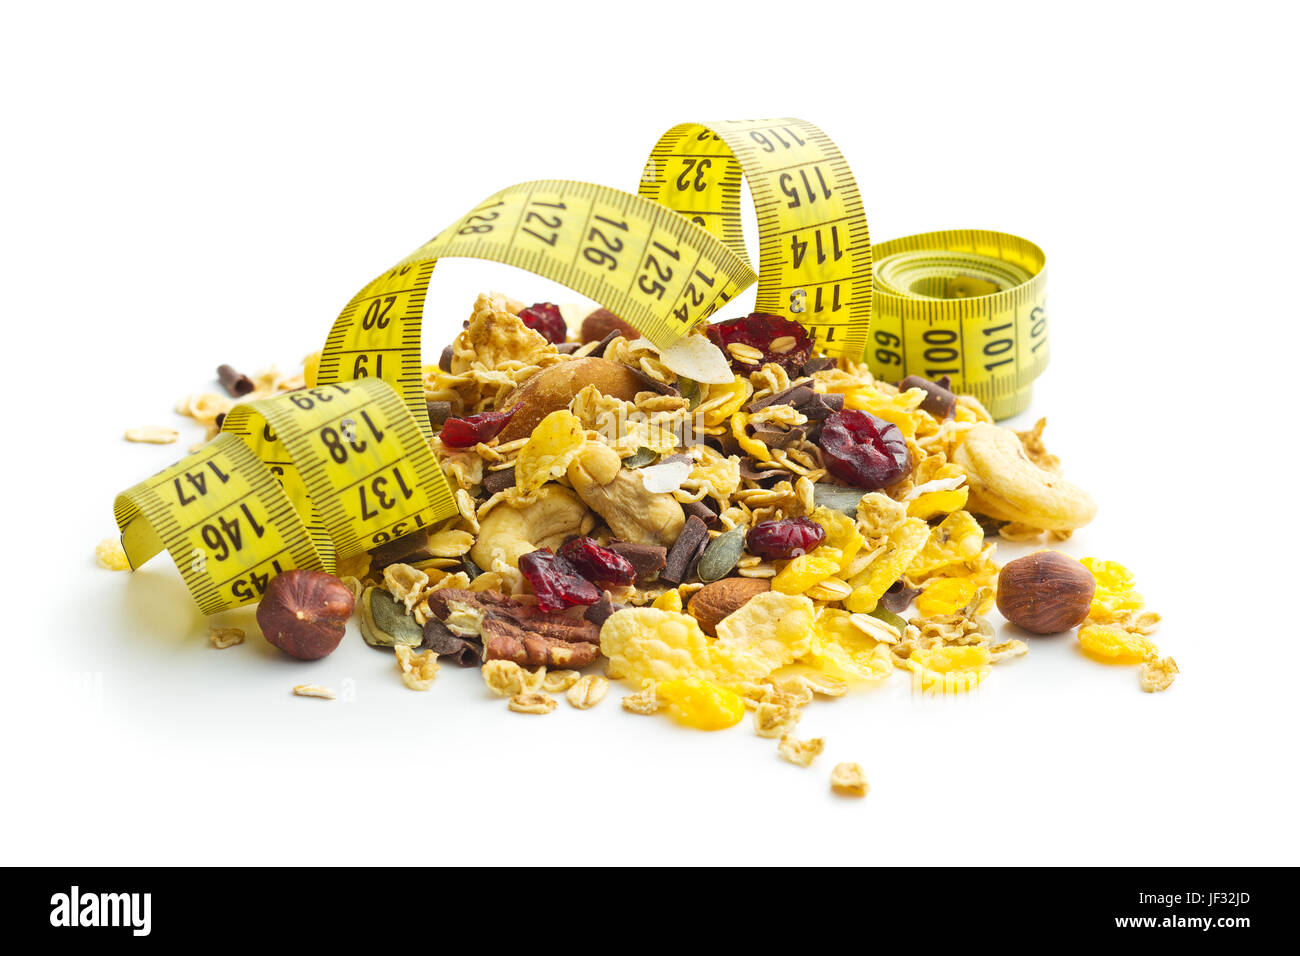 Tasty homemade muesli with nuts and measuring tape isolated on white background. Diet concept. Stock Photo